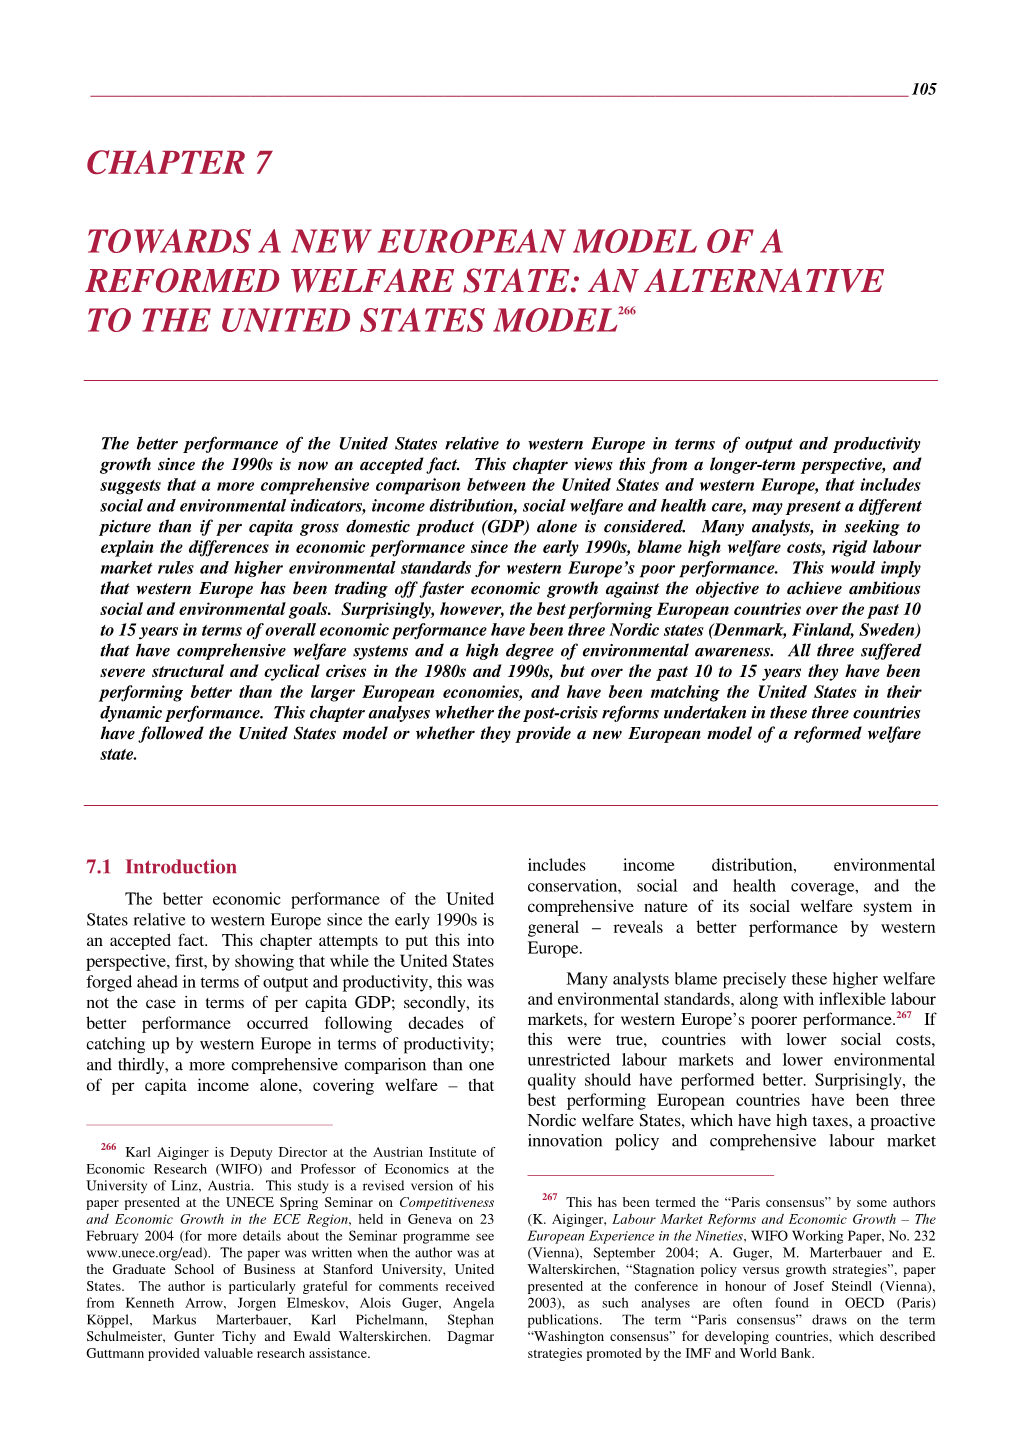 Chapter 7 Towards a New European Model Of